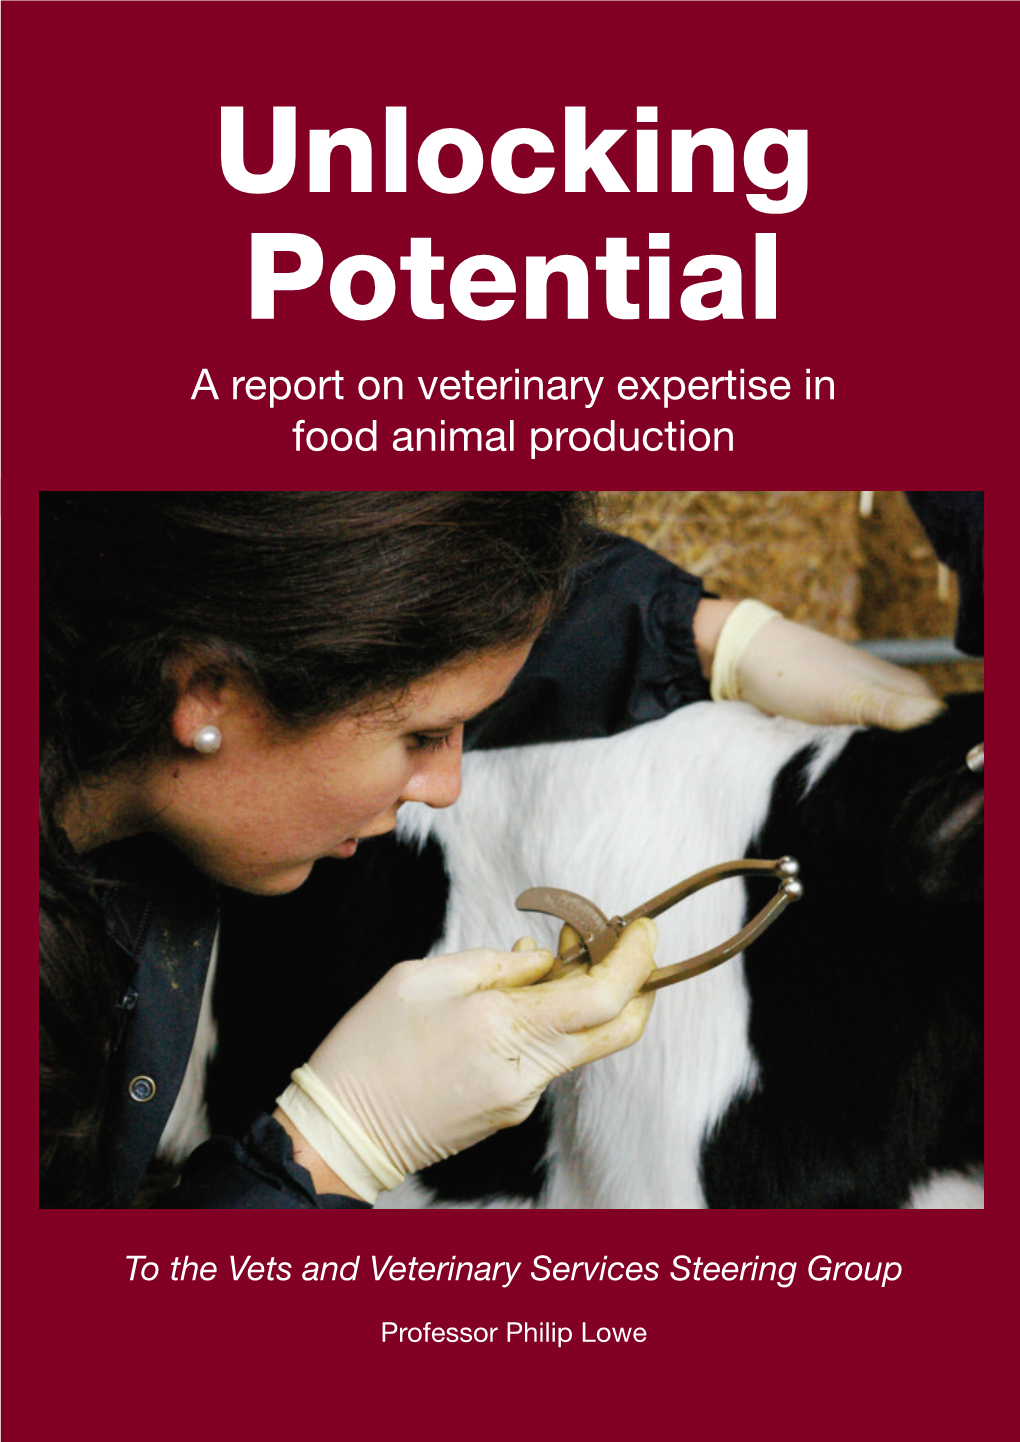 A Report on Veterinary Expertise in Food Animal Production